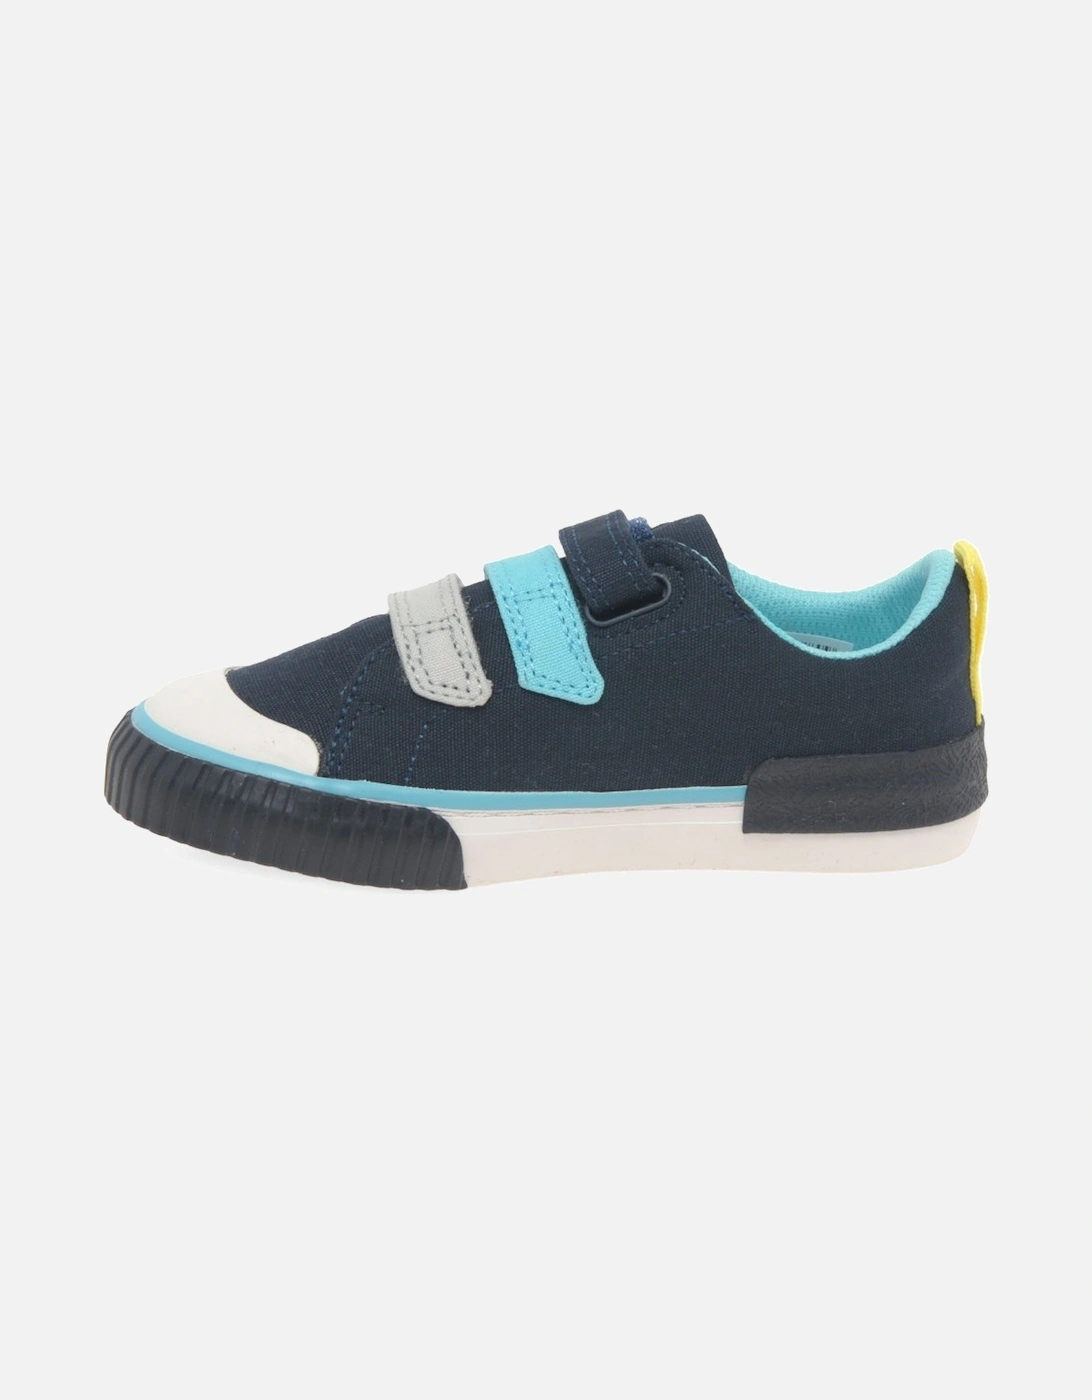 Foxing Tail K Boys Canvas Shoes